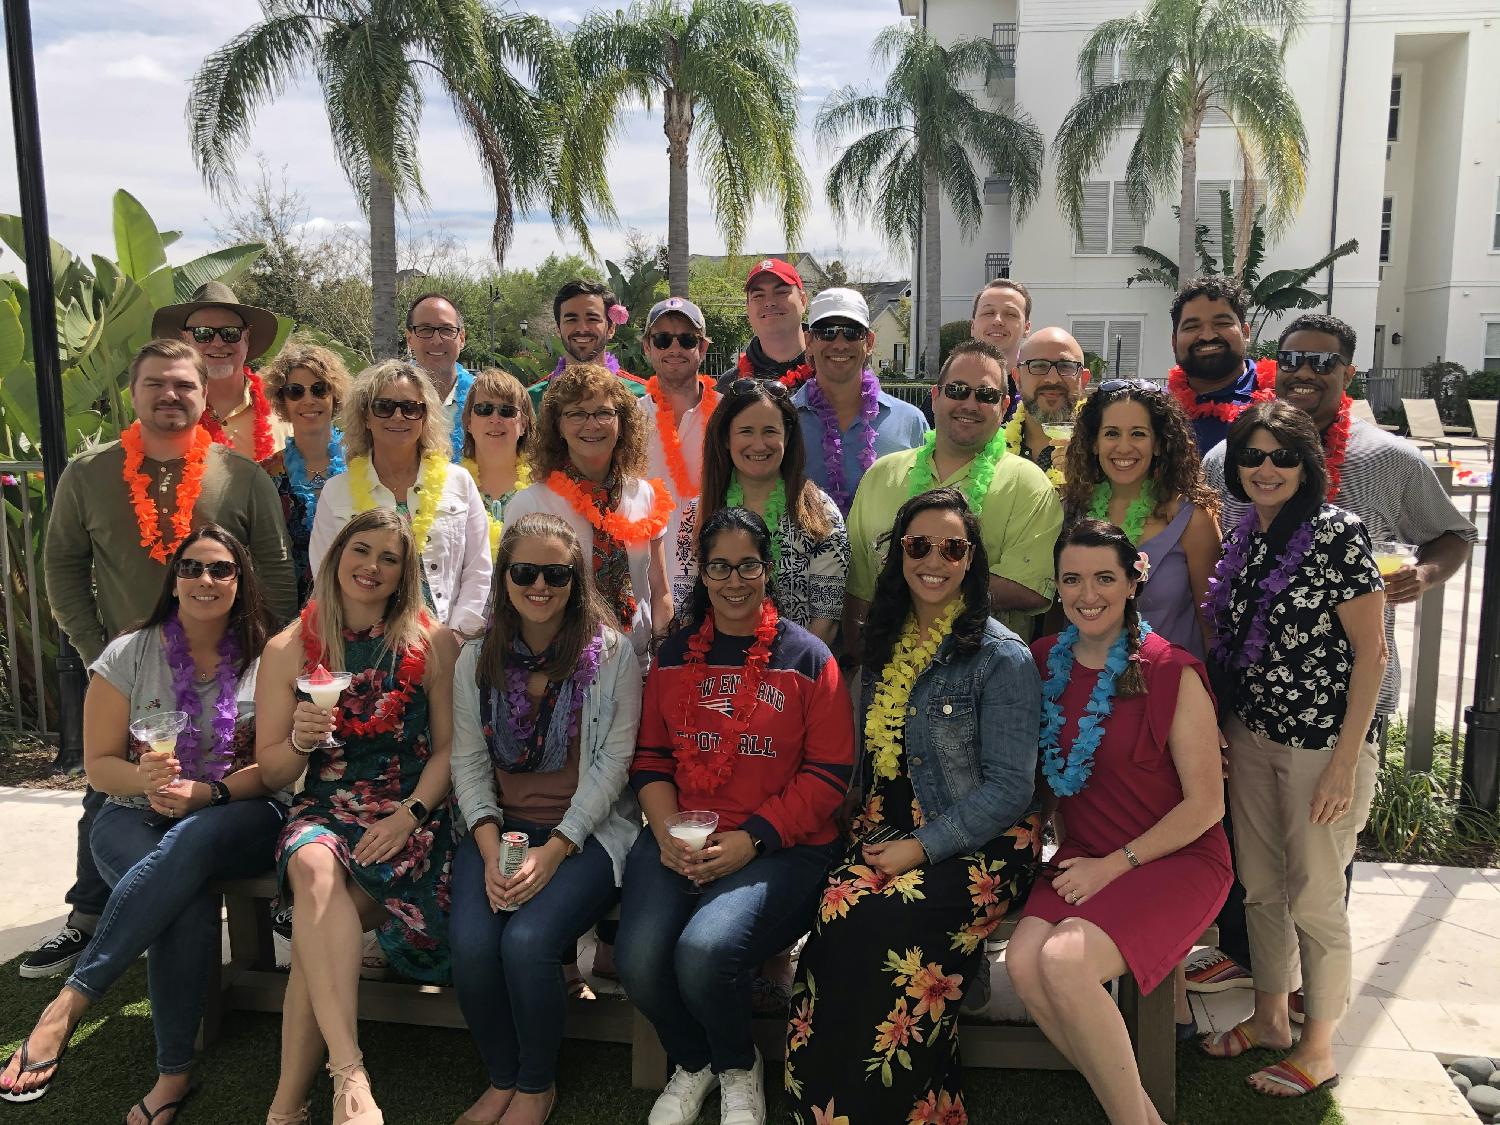 Just prior to the pandemic, eMindful mates gathered for a company luau in honor of Employee Appreciation Day.